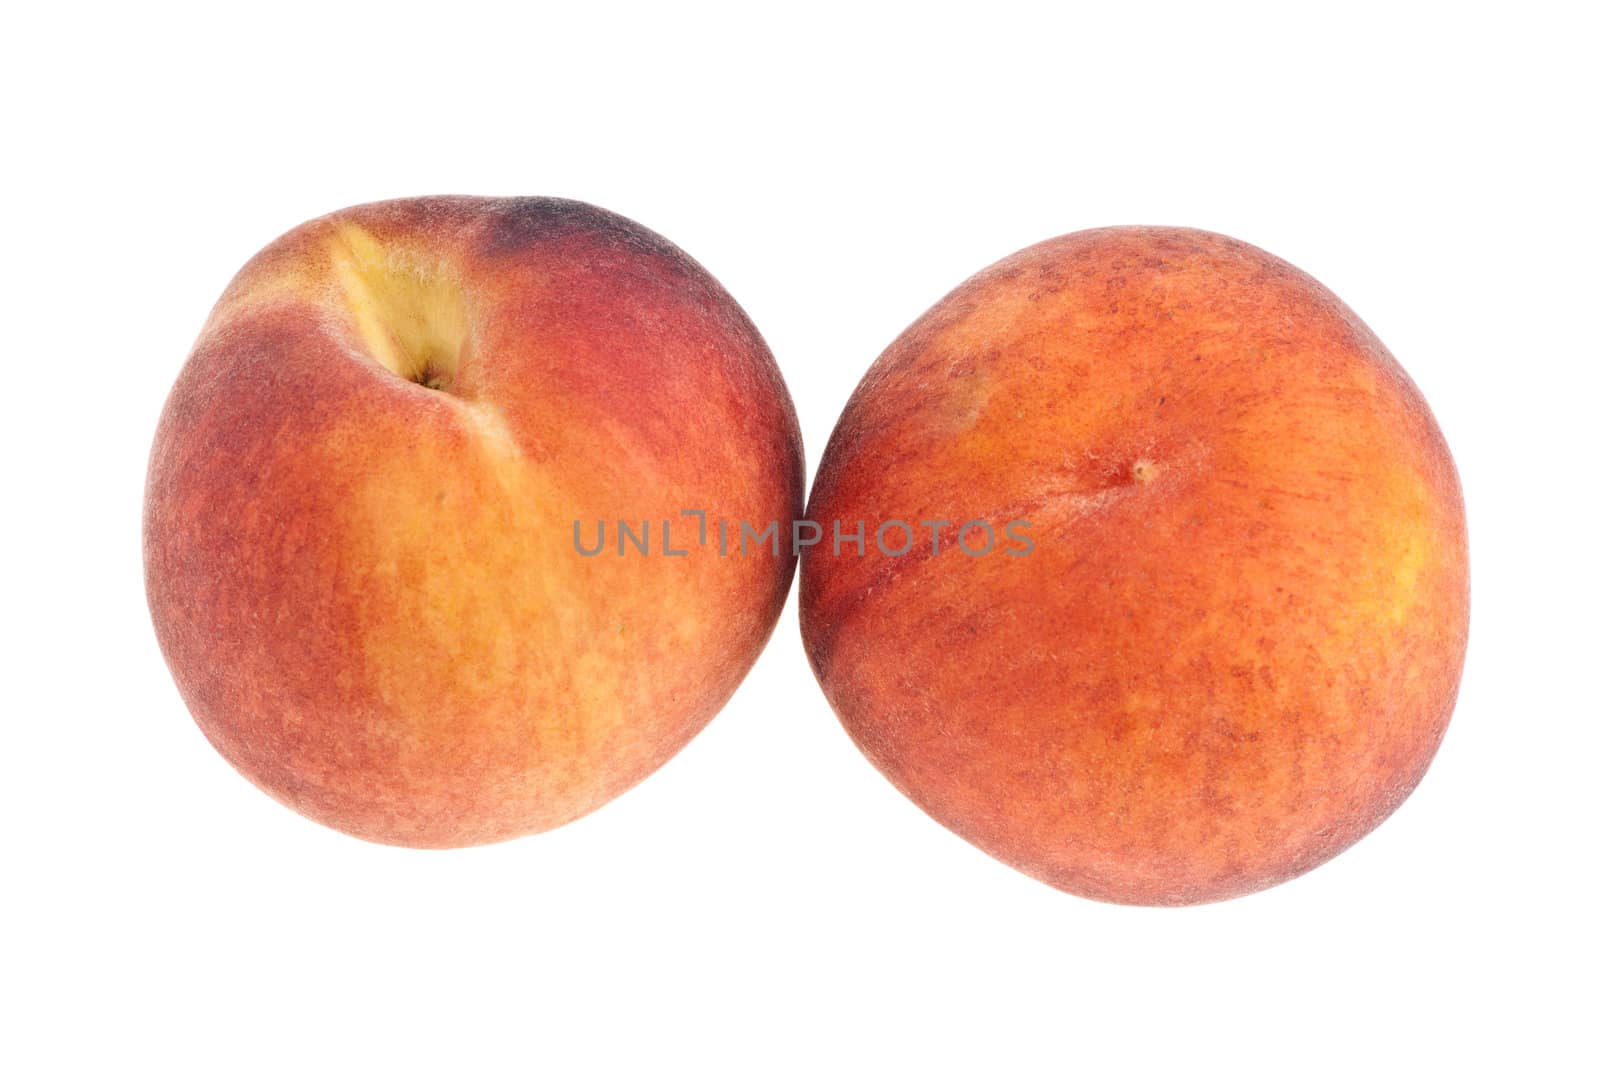 Two fresh peaches image over white background